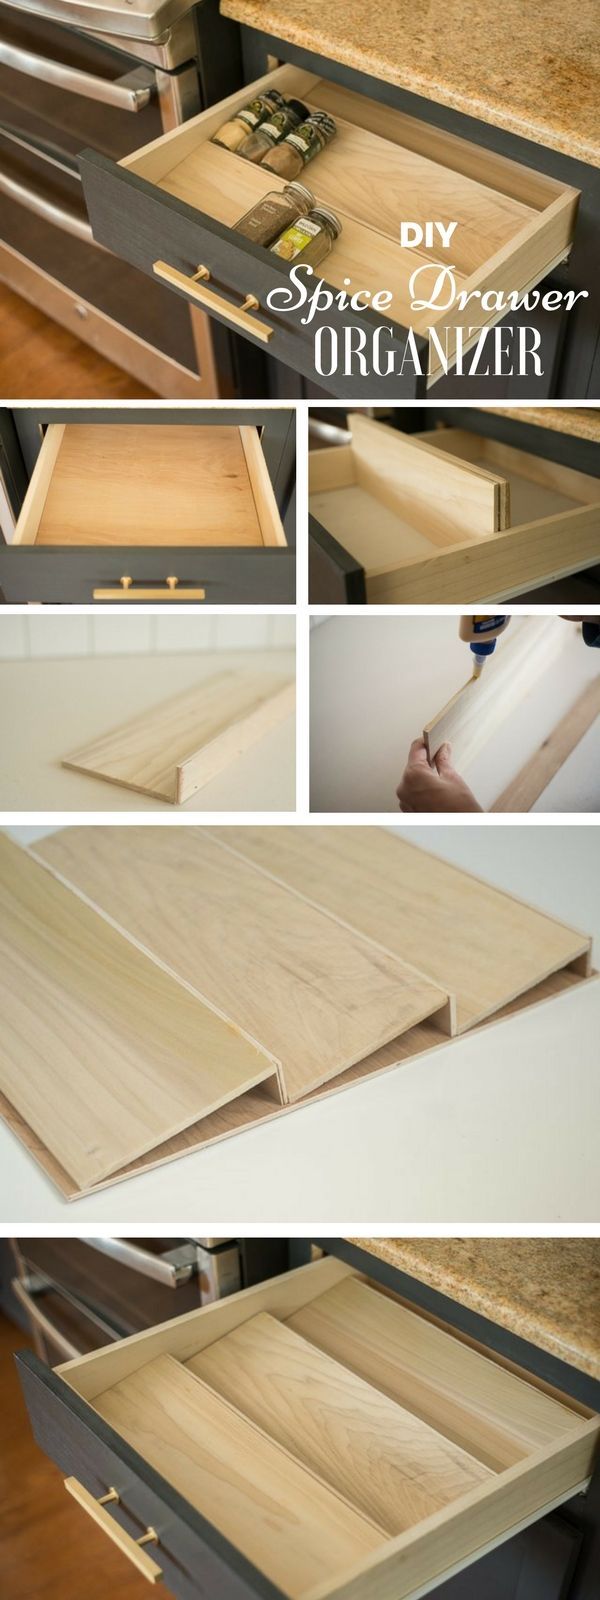 Check out the tutorial: #DIY Spice Drawer Organizer @Industry Standard Design